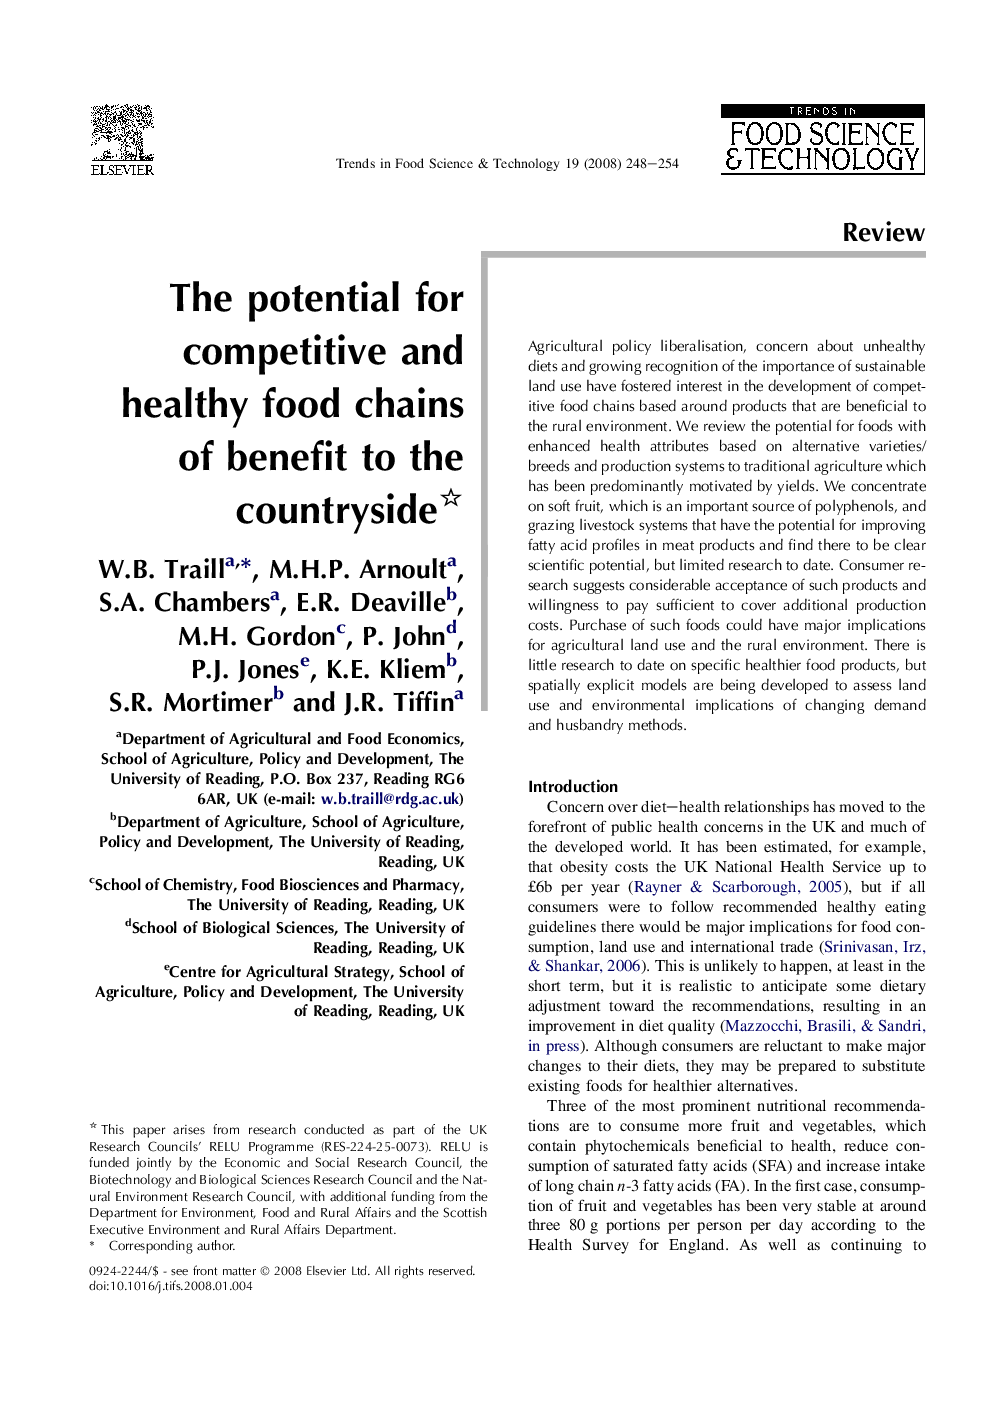 The potential for competitive and healthy food chains of benefit to the countryside 